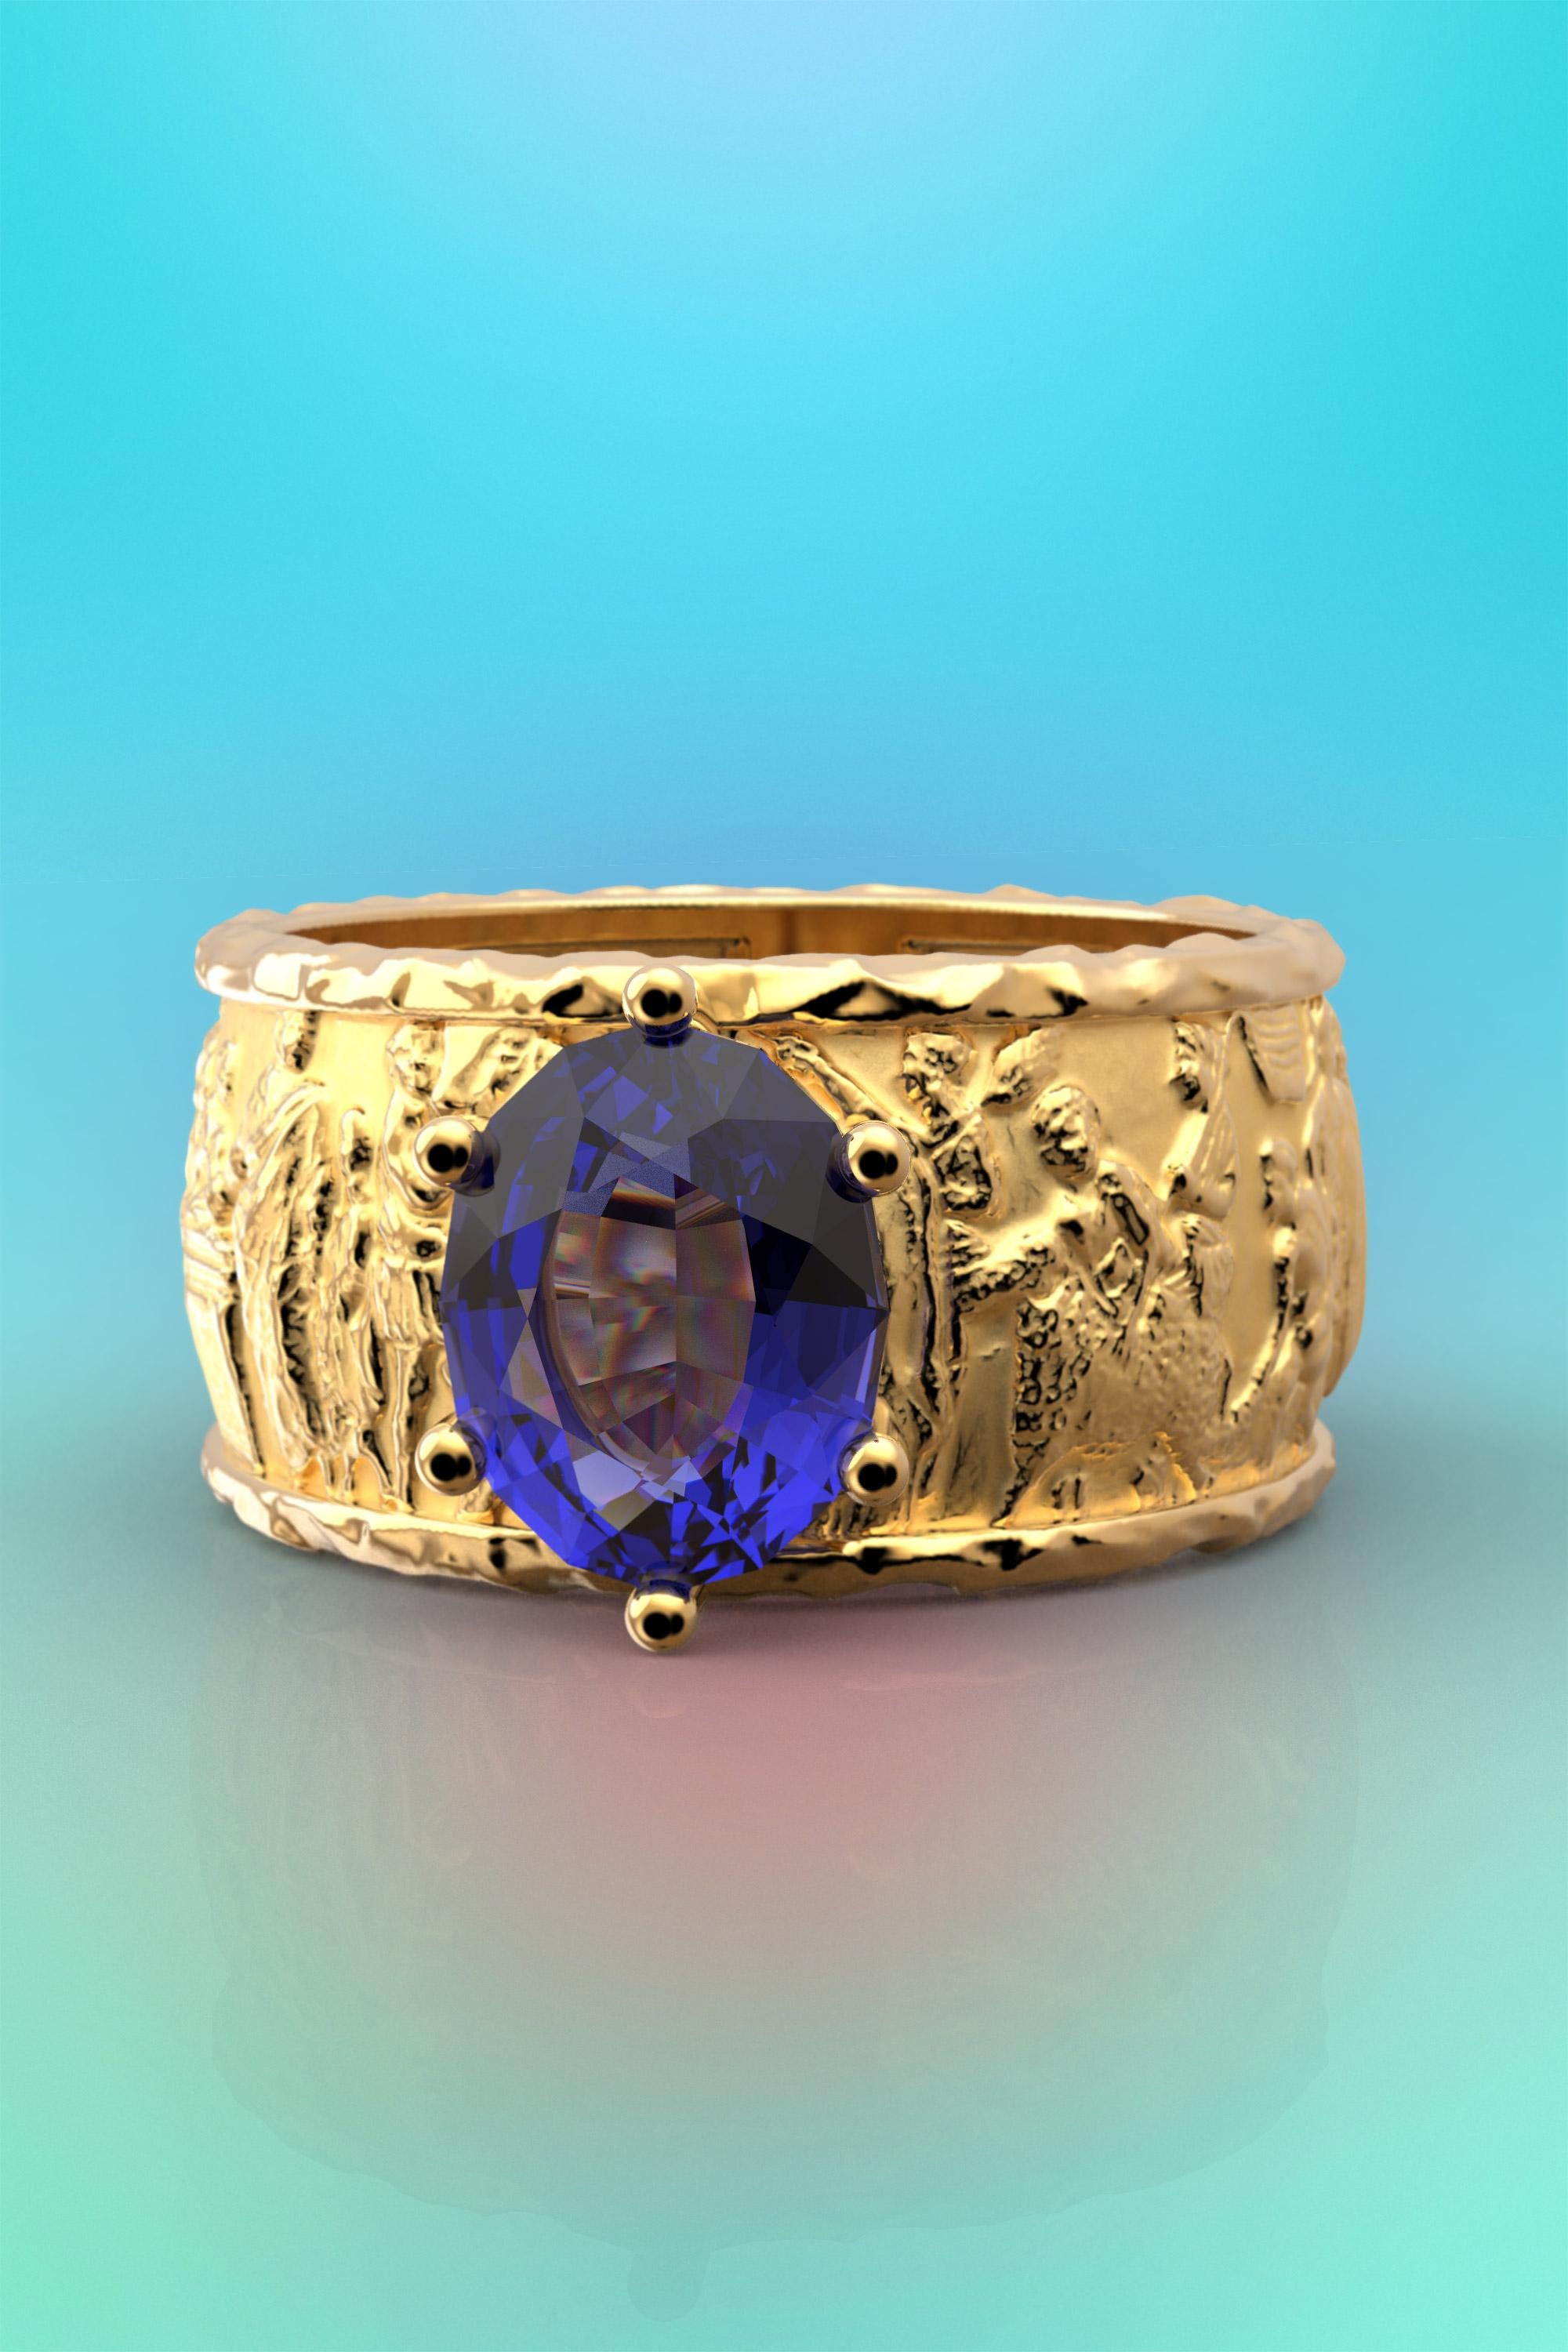 For Sale:  Tanzanite gold ring in 18k solid gold by Oltremare Gioielli made in Italy. 12